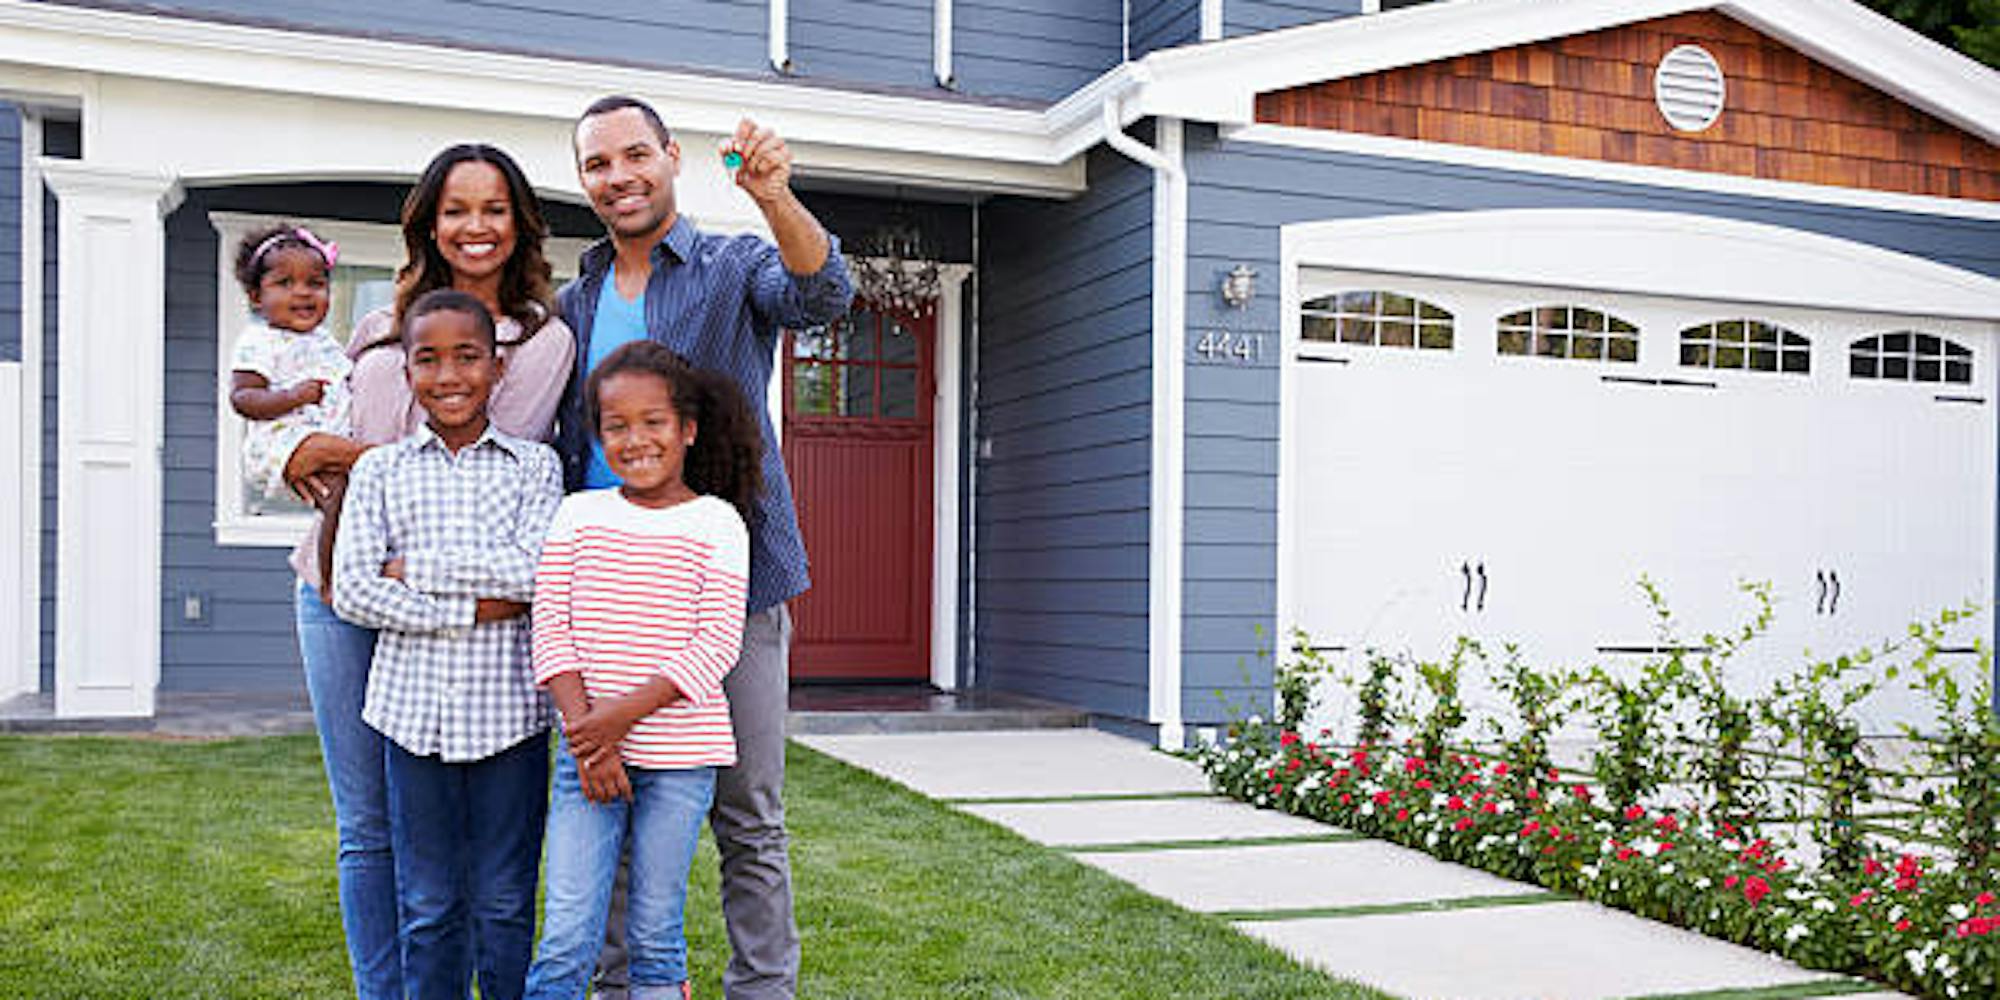 What are the benefits of Homeownership?